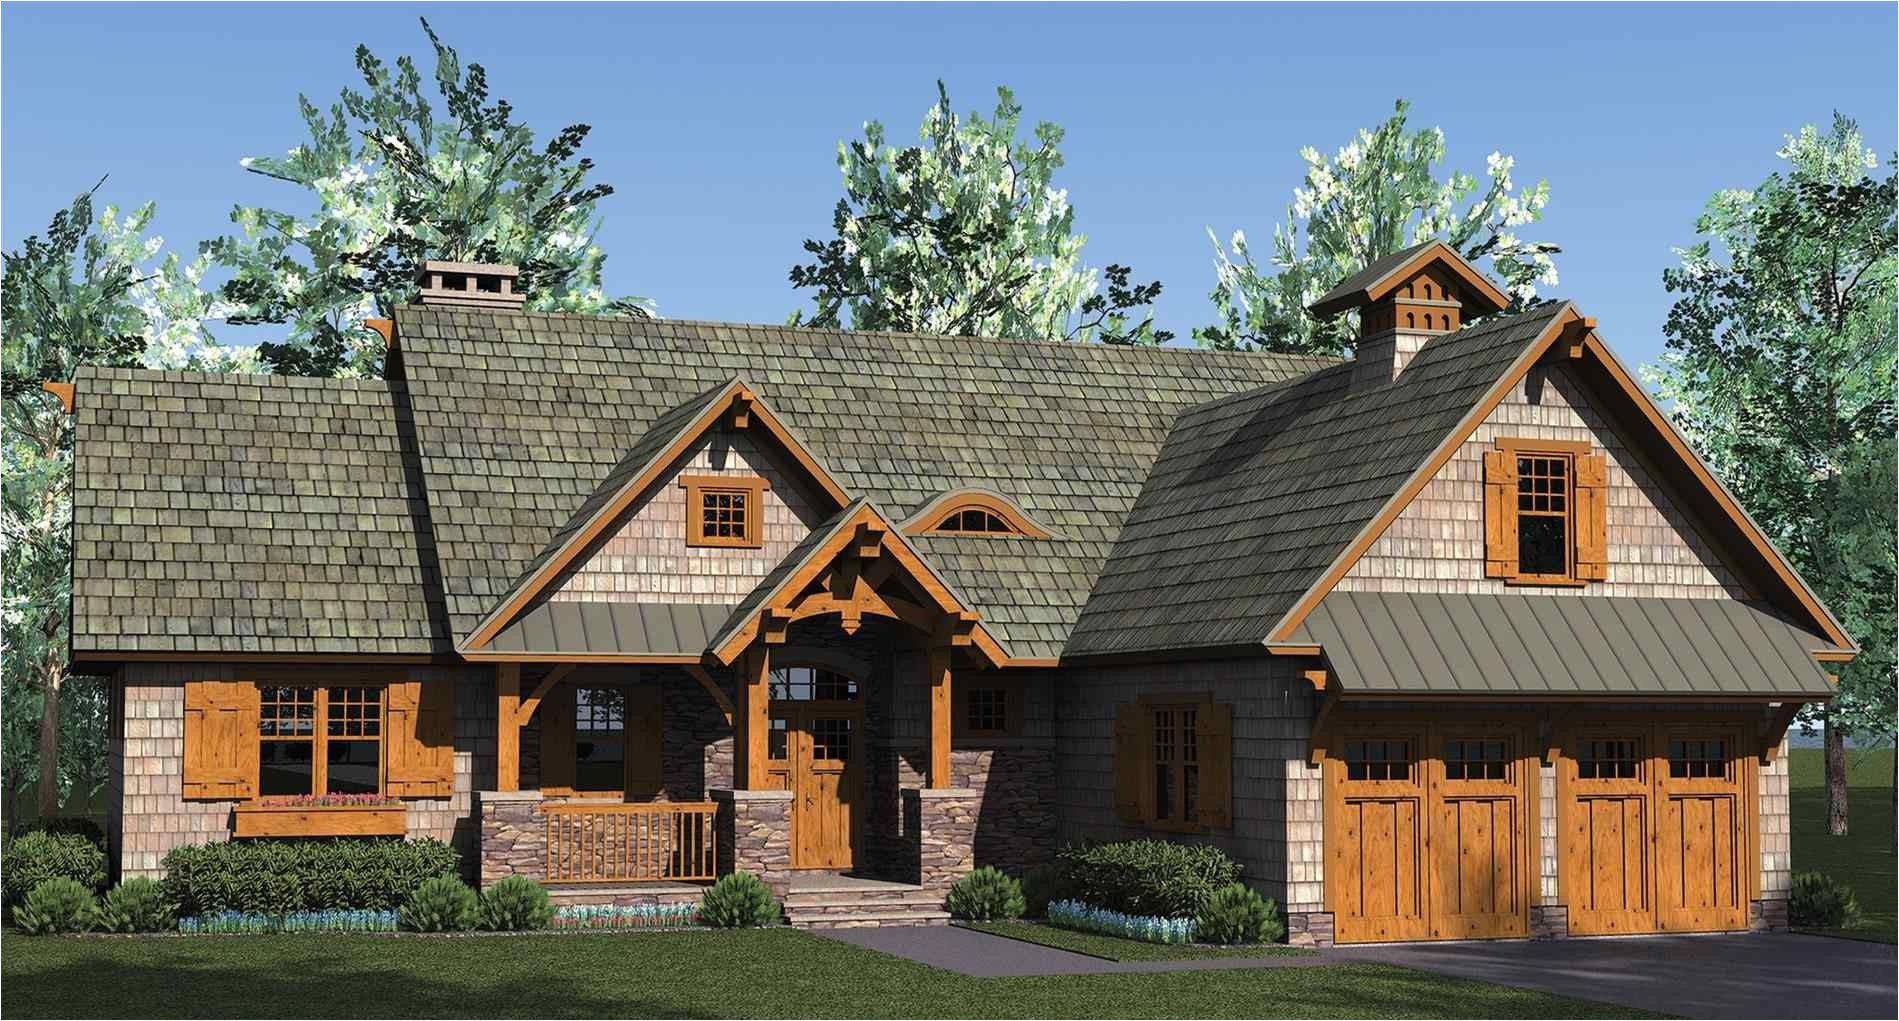 plans most popular home classic apartments apartments simple rustic house plans log home designs timber framed homes with pic log simple rustic jpg